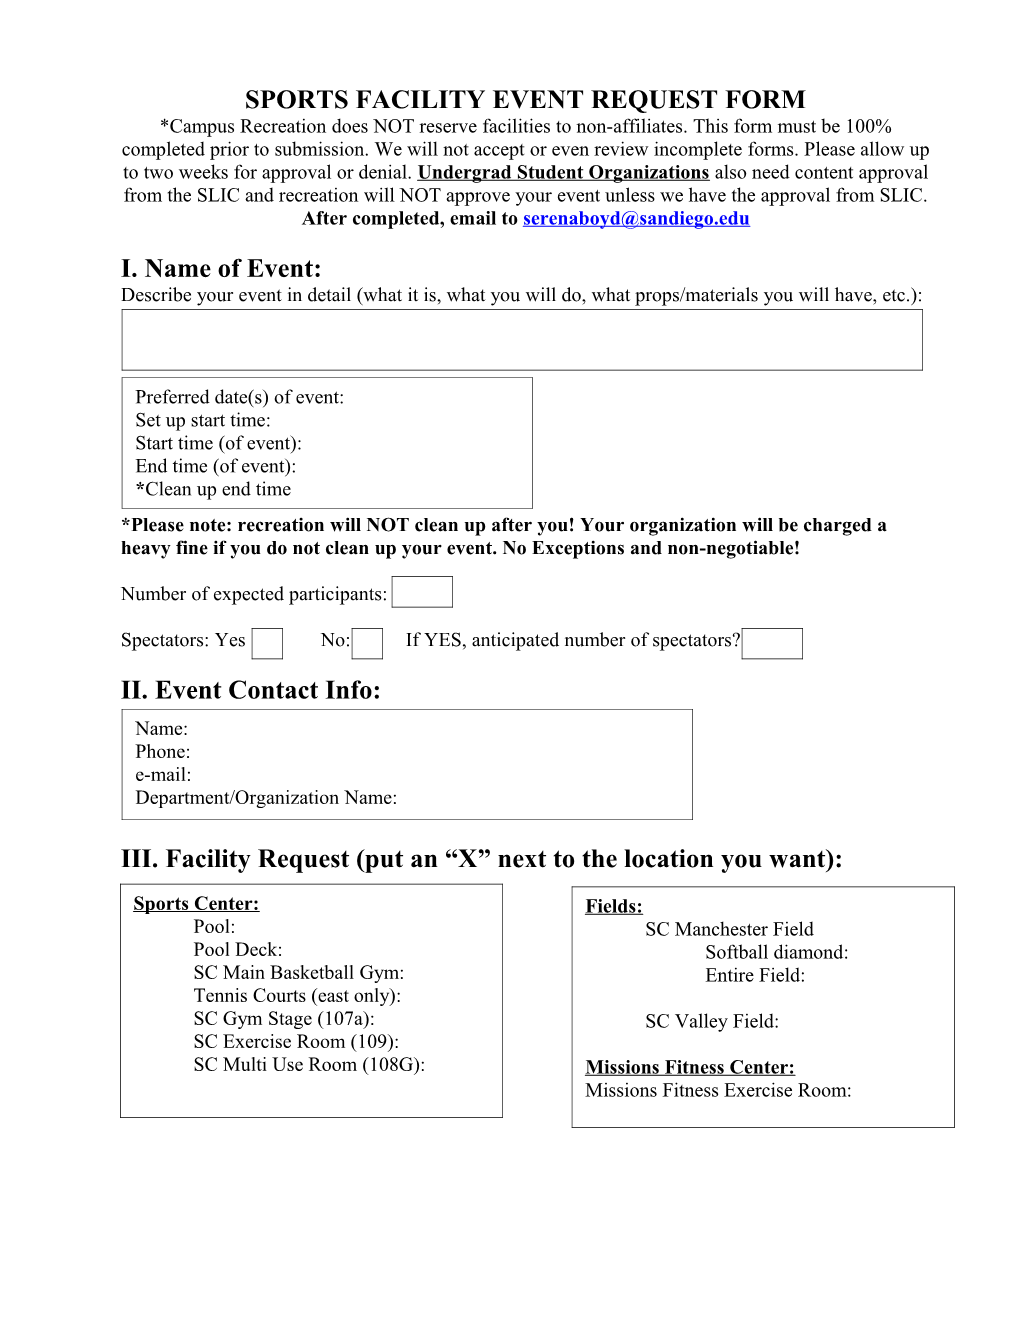 Sports Facility Event Request Form